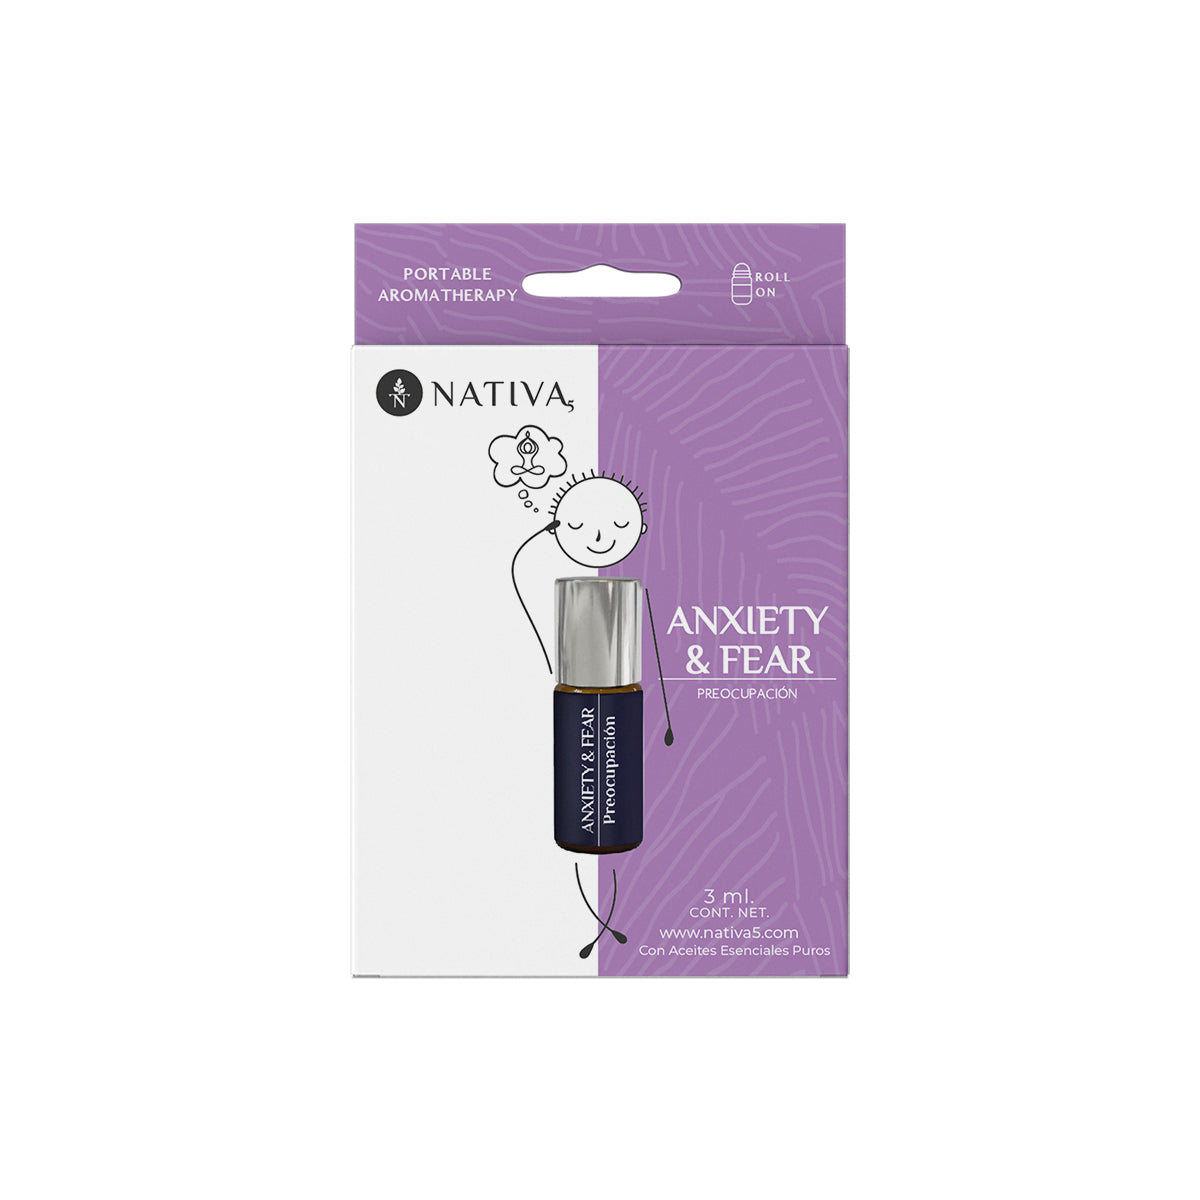 ANXIETY &amp; FEAR Roll On - Portable Aromatherapy 3ml